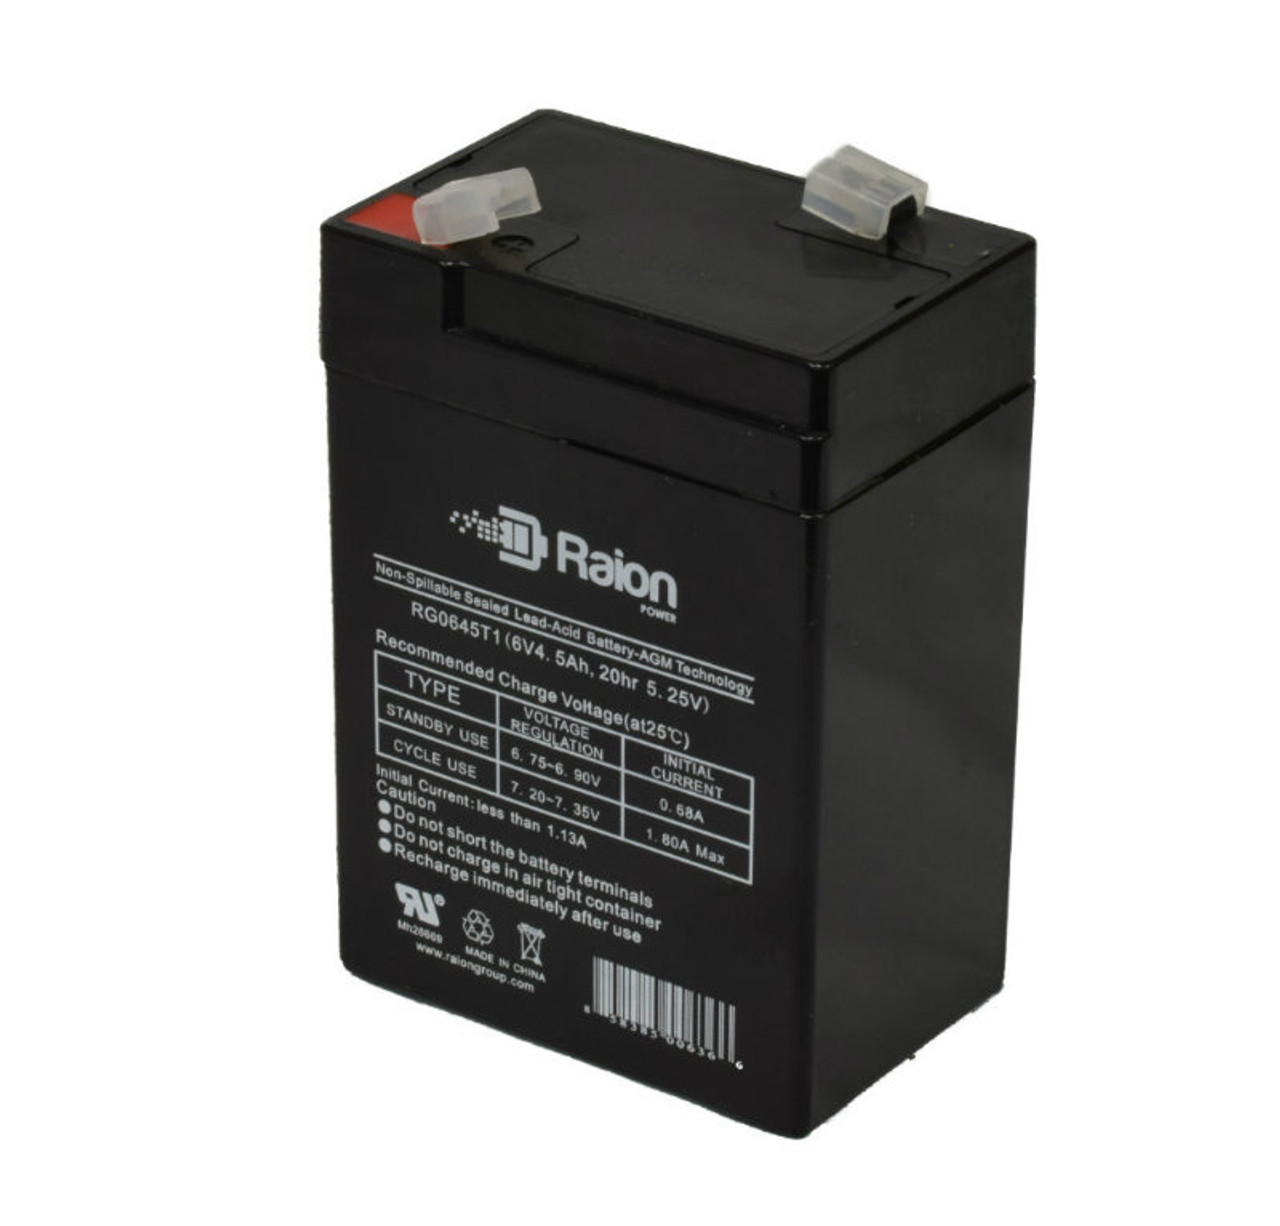 Raion Power RG0645T1 6V 4.5Ah Replacement Battery Cartridge for Lithonia ELB06042